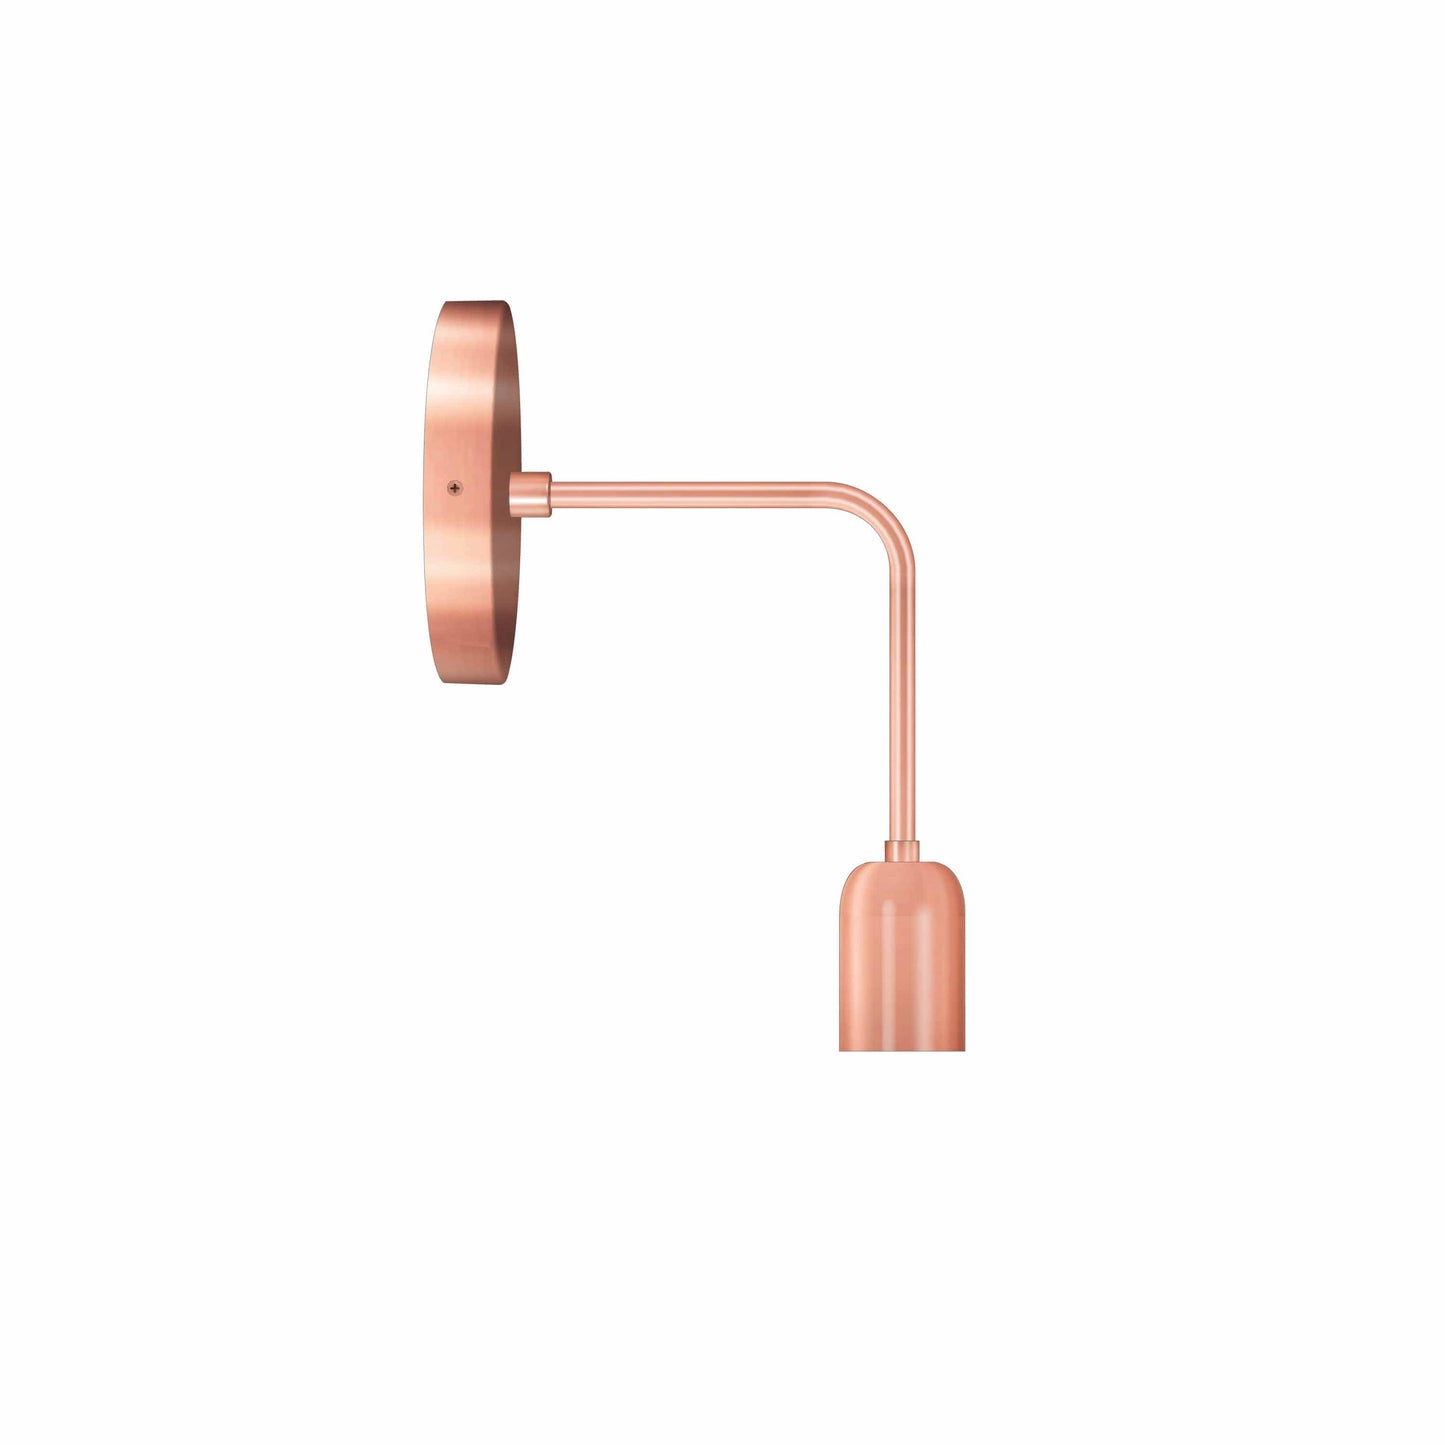 Bend Solo Sconce